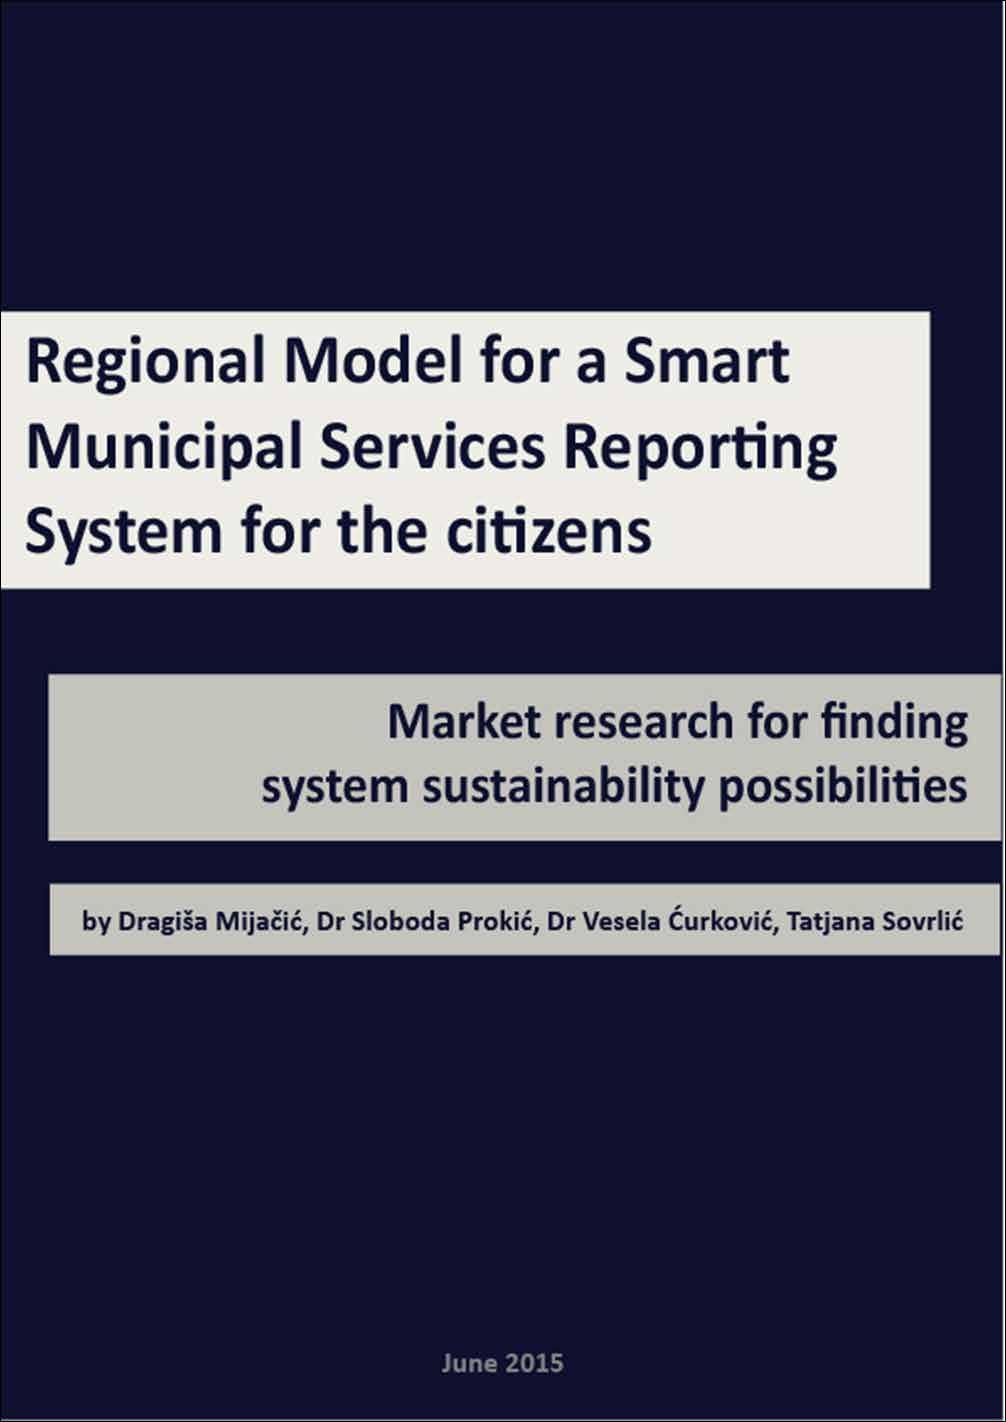 LIBRARY Regional Model for a Smart Municipal Services Reporting System for the citizens - Market research for finding system sustainability